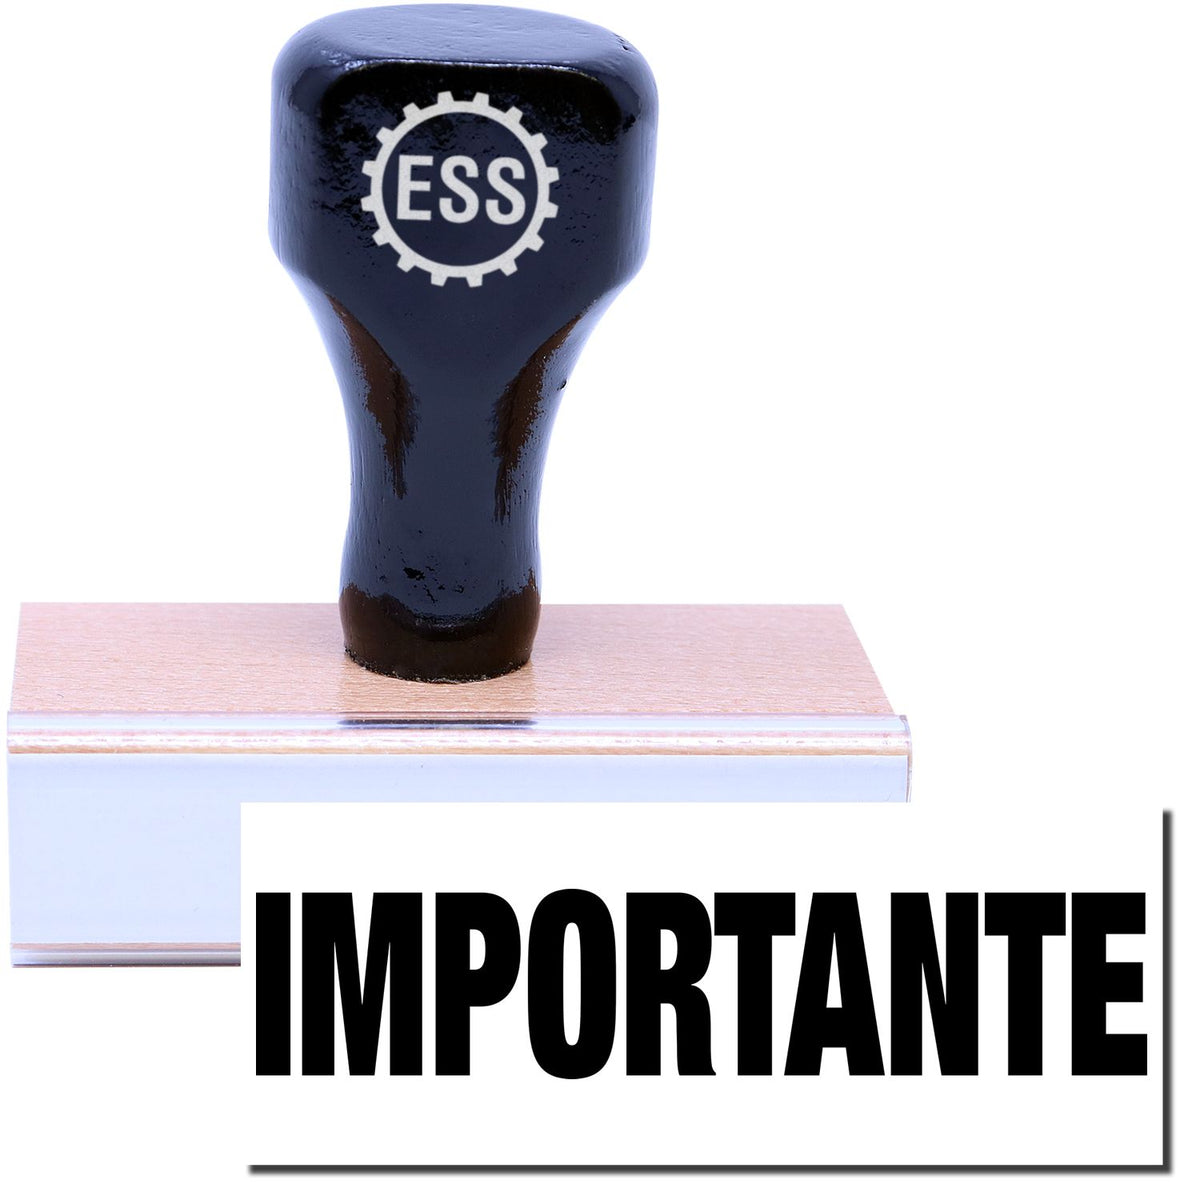 A stock office rubber stamp with a stamped image showing how the text &quot;IMPORTANTE&quot; is displayed after stamping.